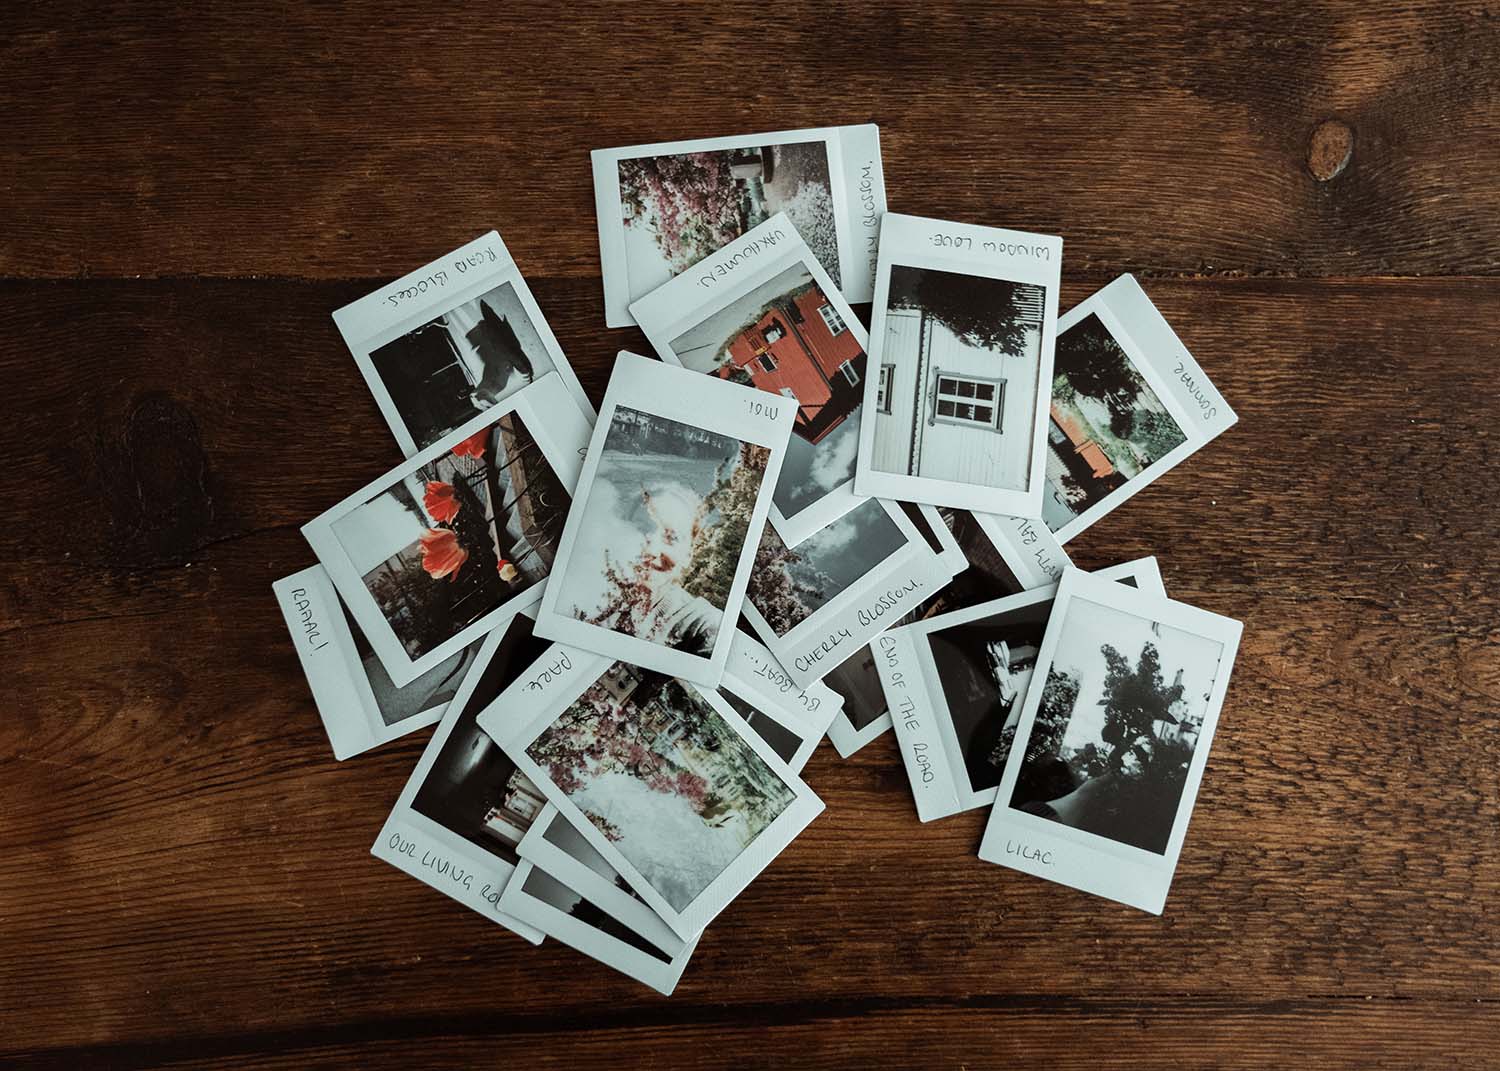 Print Out Photos of Your Favorite Moments